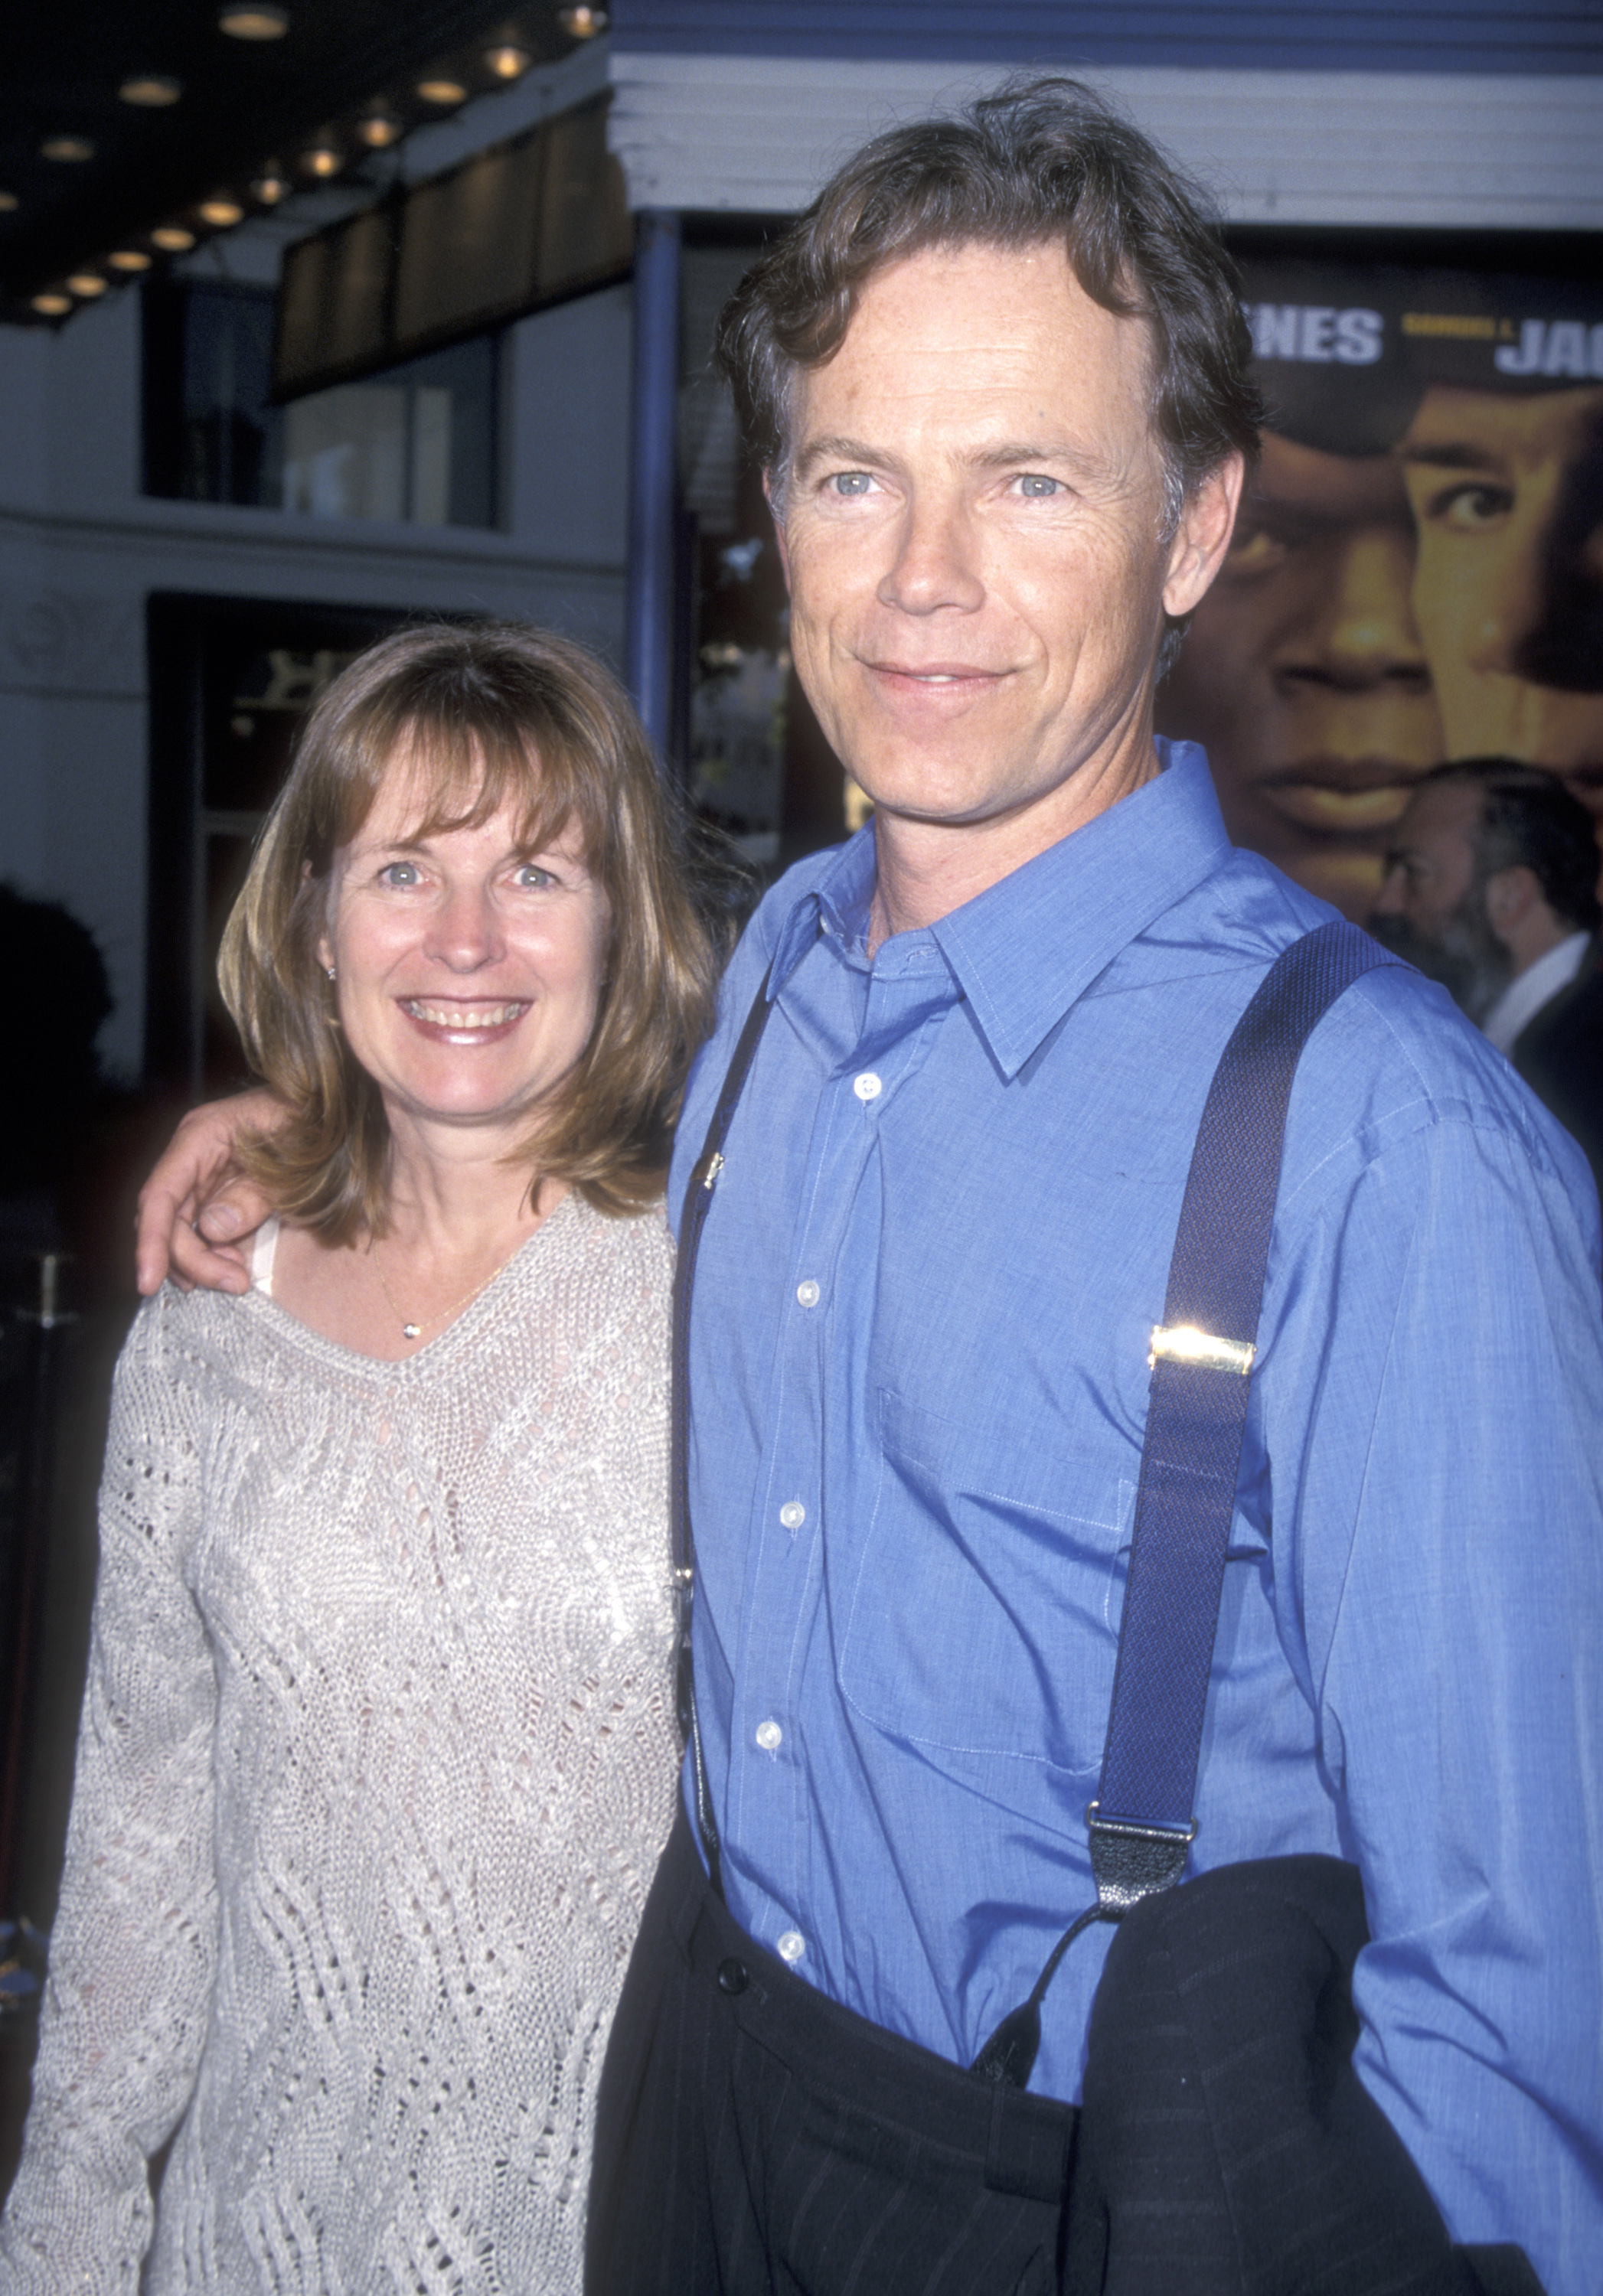 Susan Devlin and Bruce Greenwood at the "Rules of Engagement" premiere on April 2, 2000, in California. | Source: Getty Images